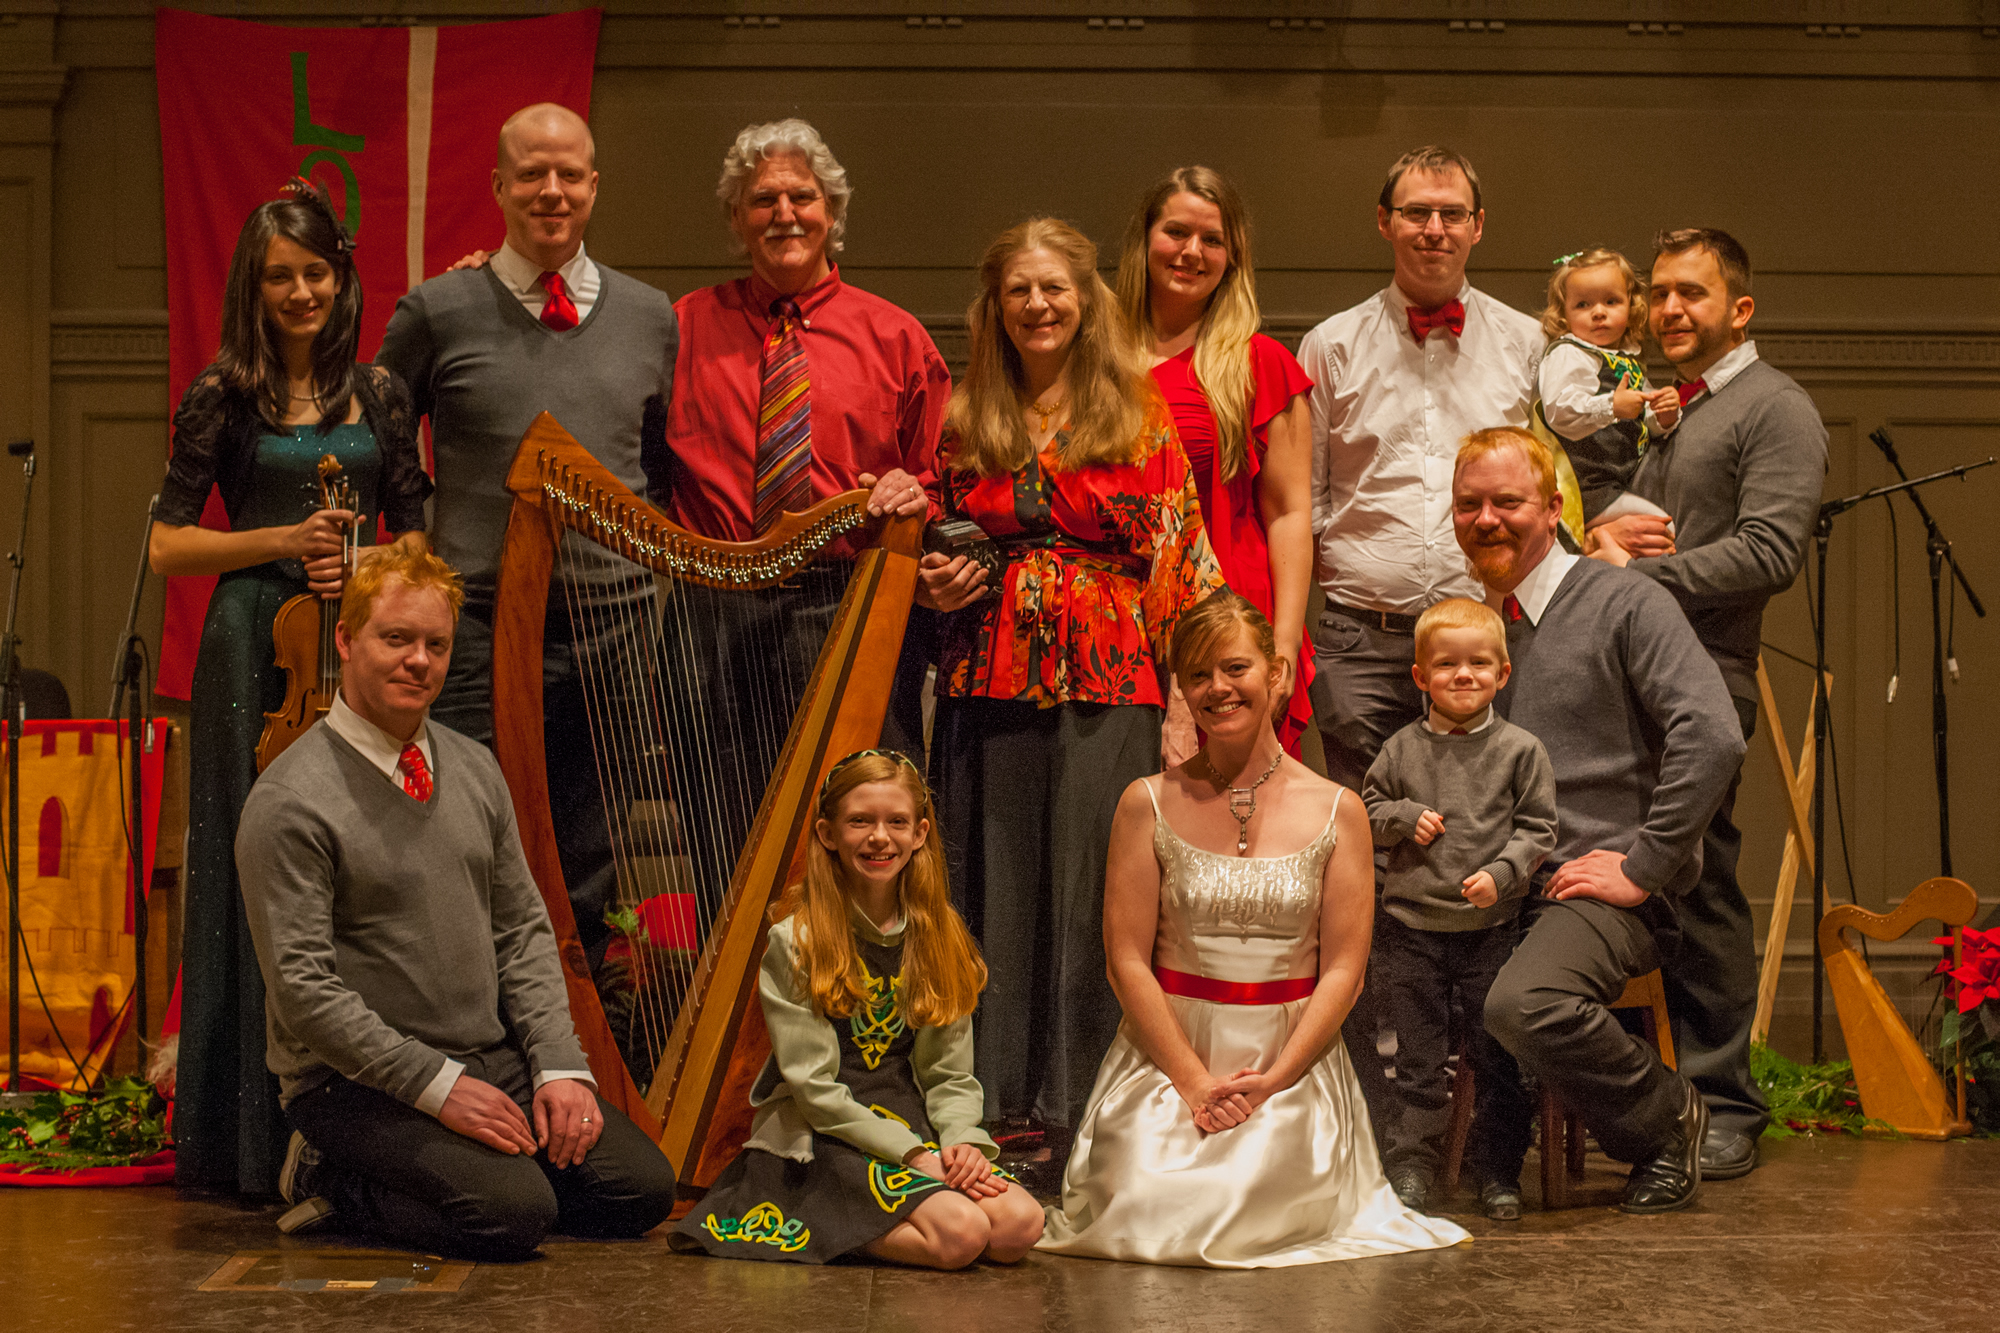 In its 35th year of annual holiday performances, acclaimed family performing group Magical Strings announces its 2013 schedule of Celtic Yuletide concerts across Puget Sound.